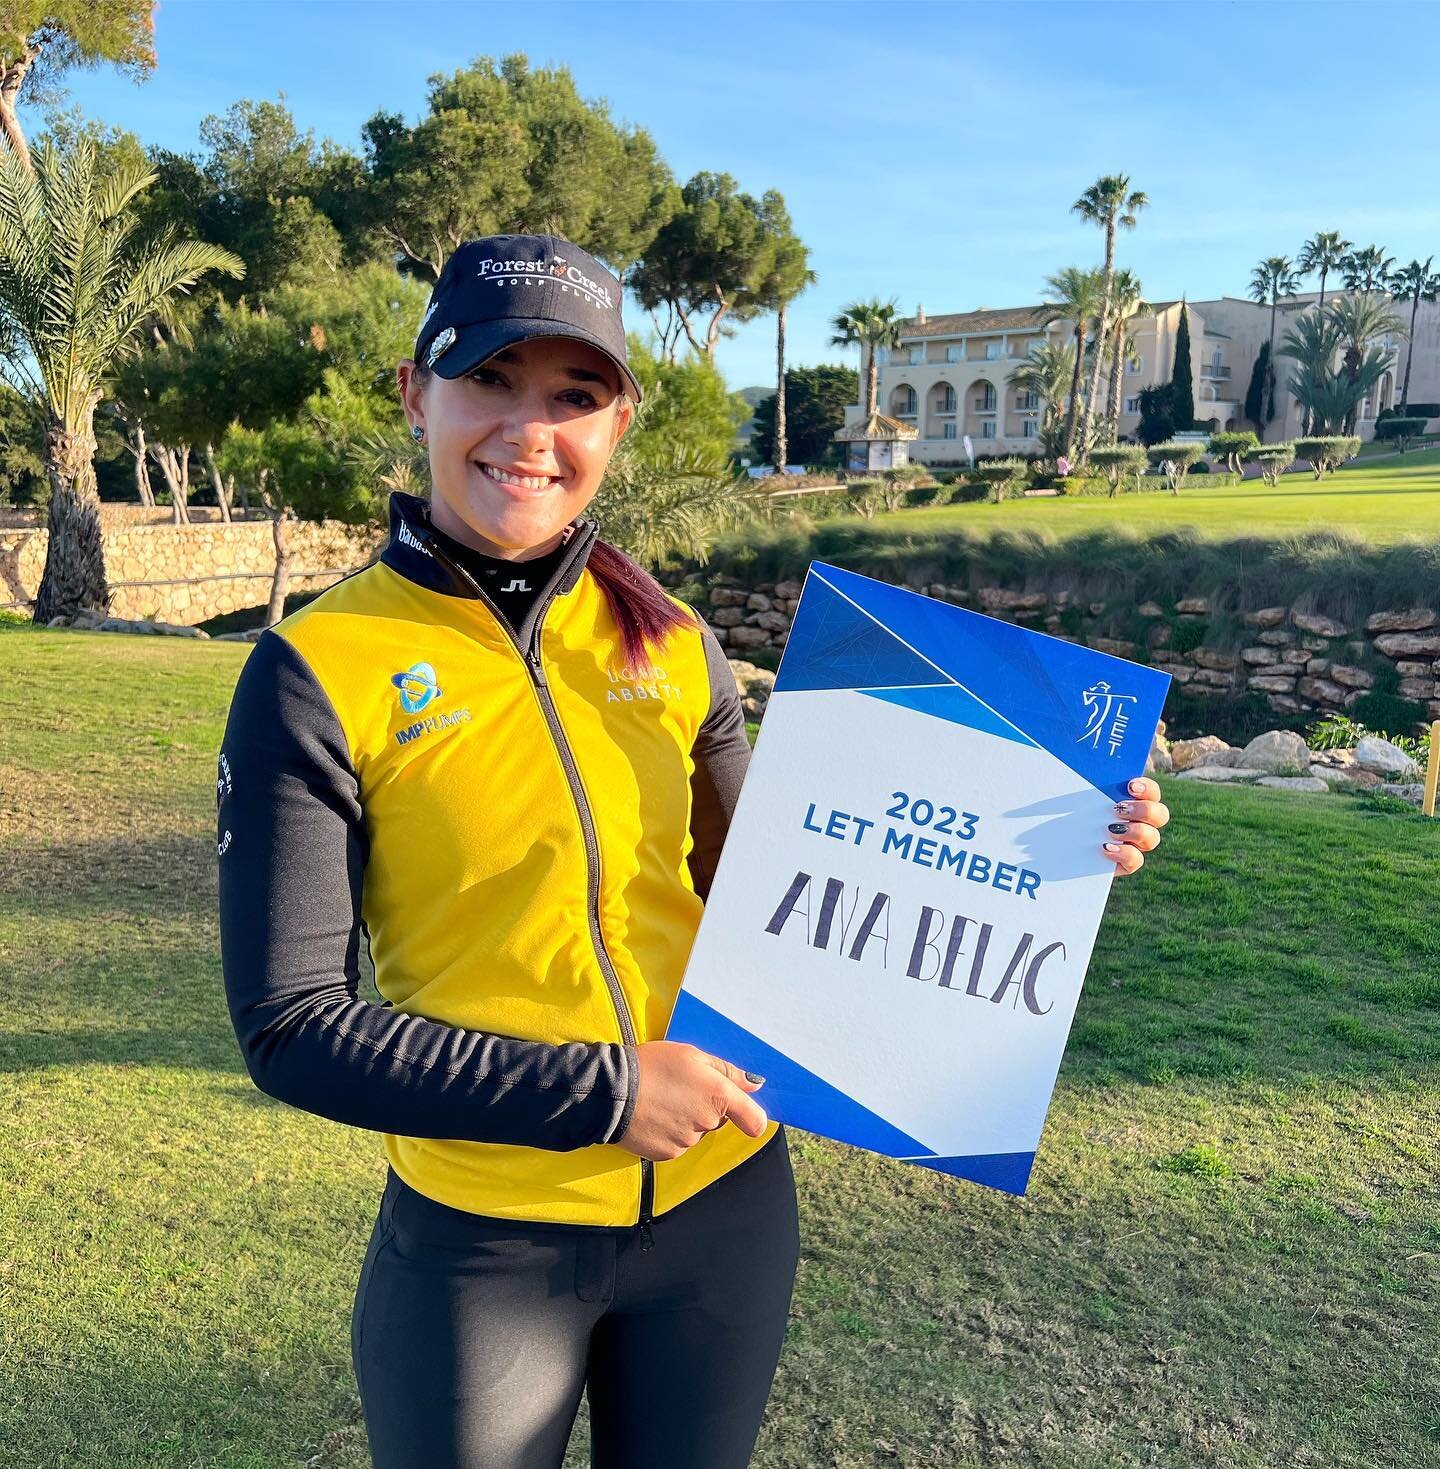 Another congratulations to Ana Belac for securing @letgolf status for 2023! A final round 67 with an eagle to finish 🇸🇮